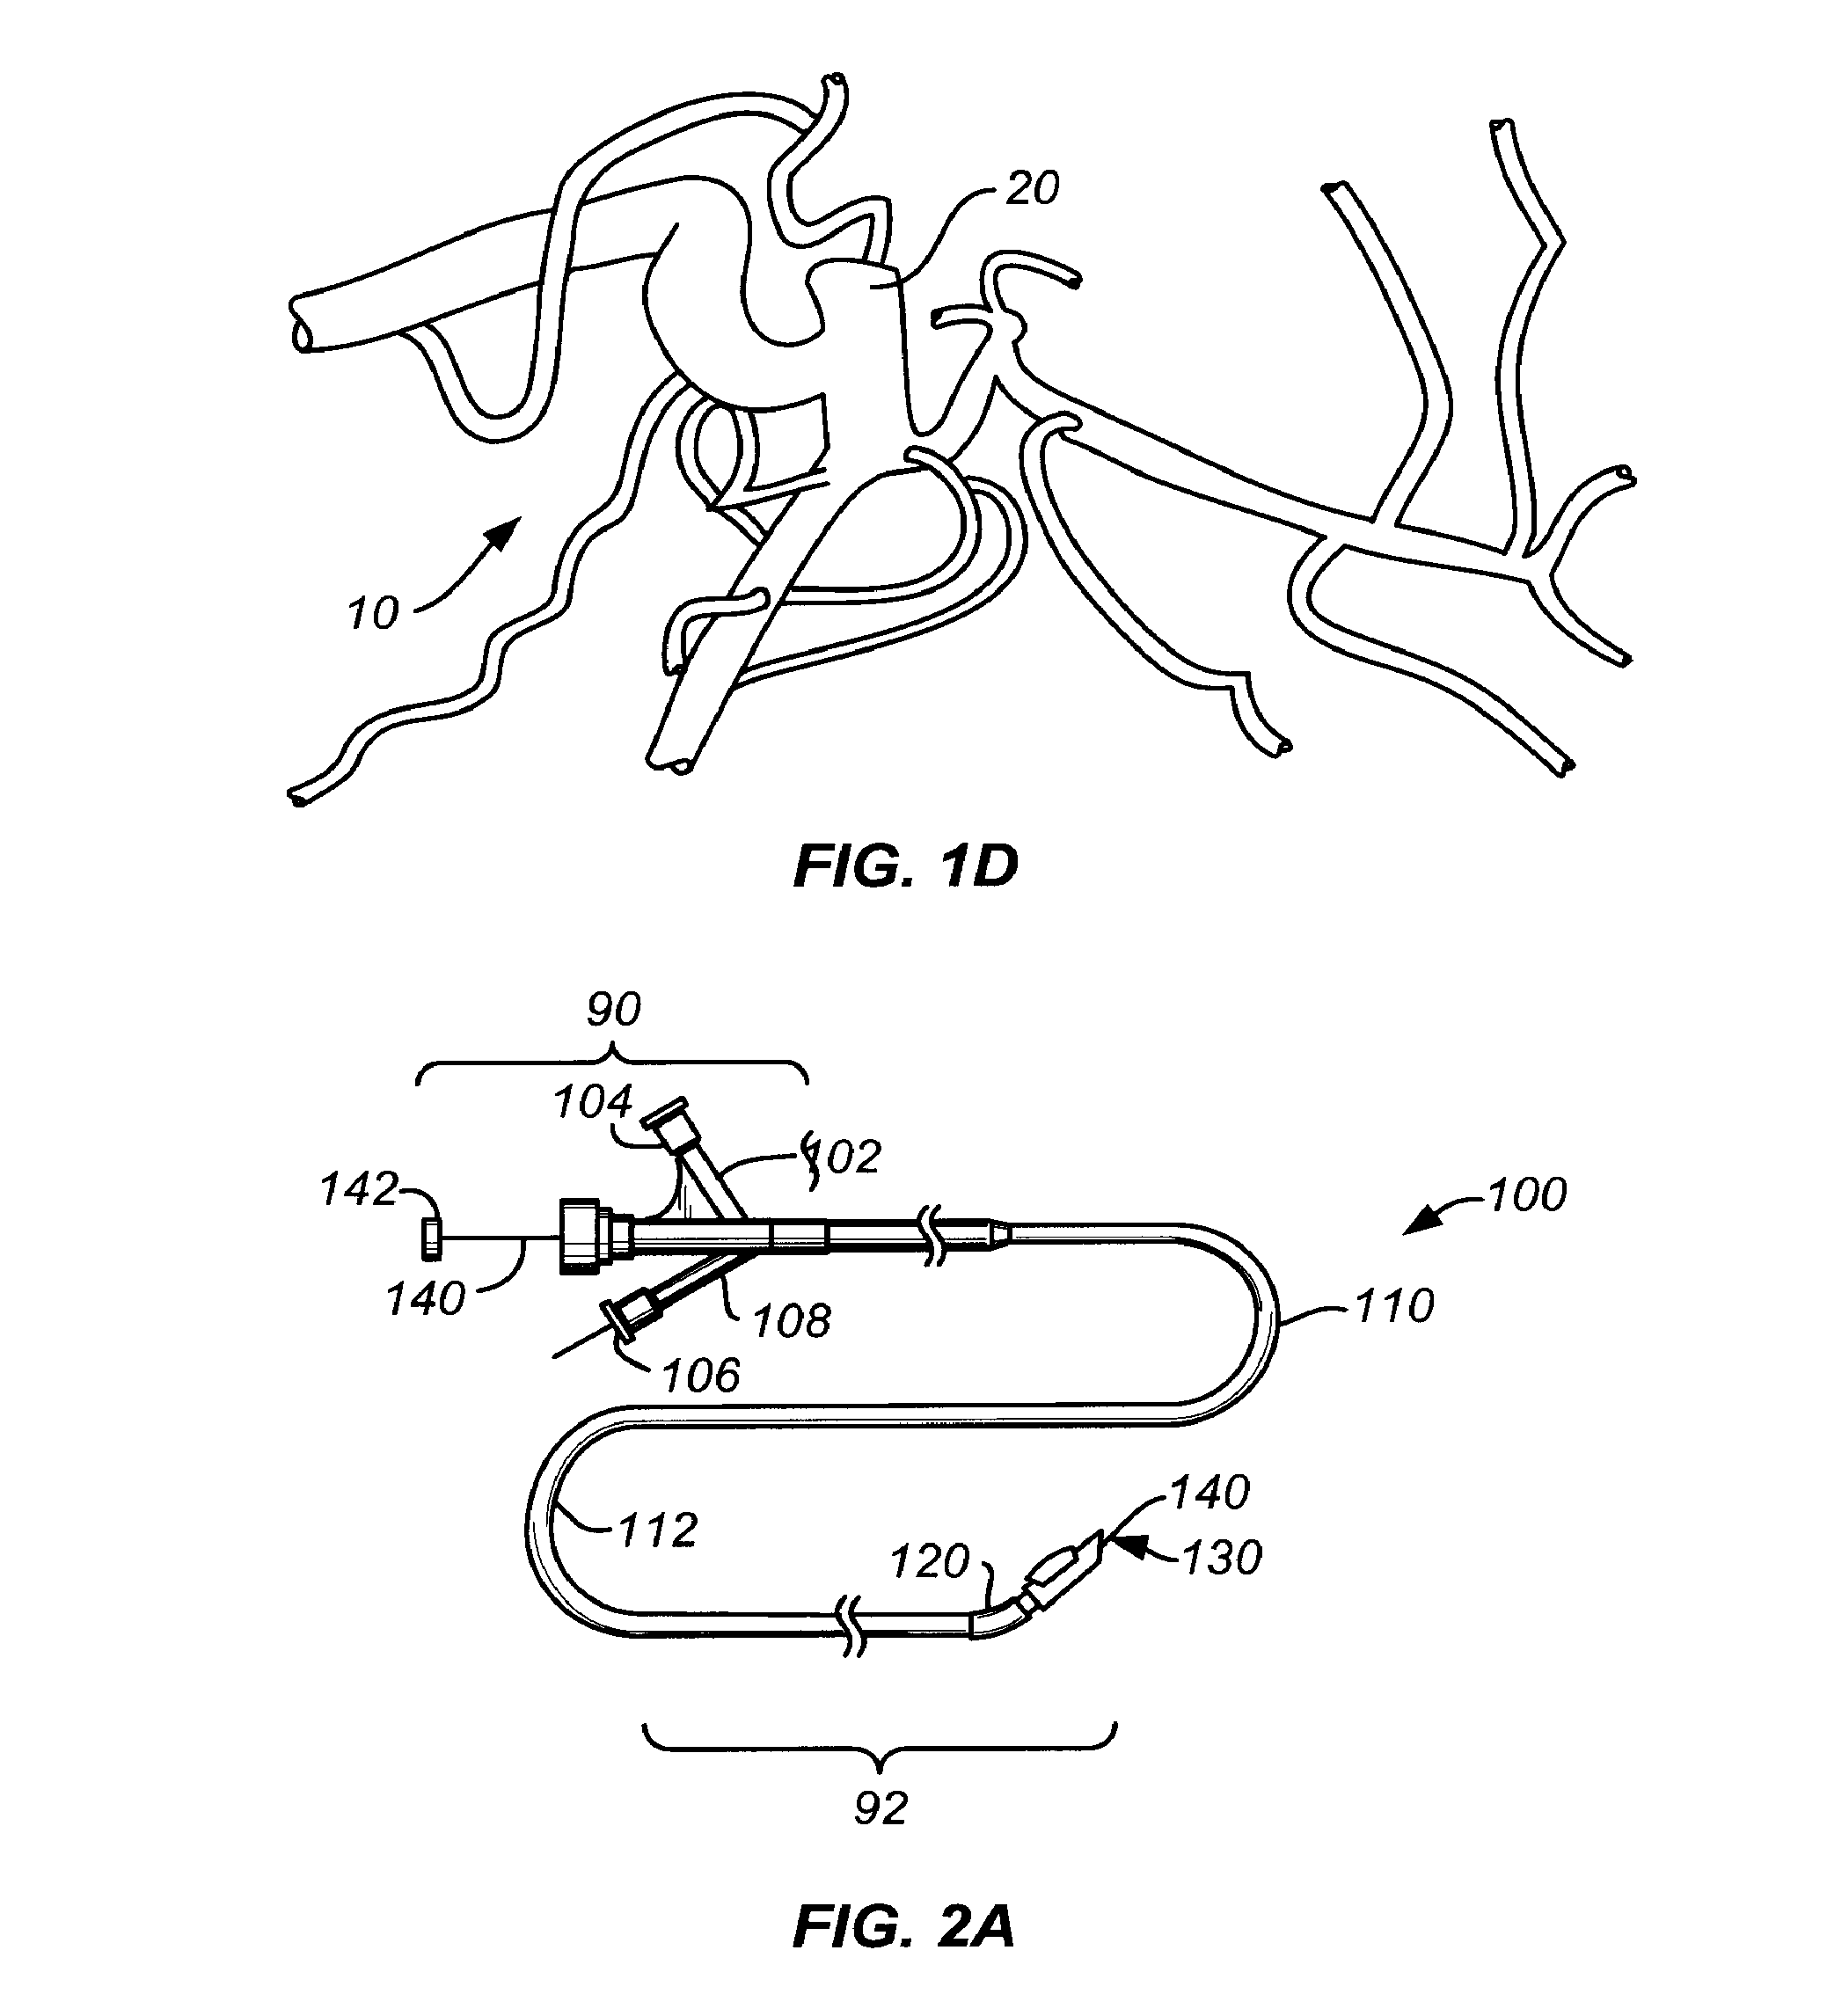 Devices and methods for accessing and treating an aneurysm